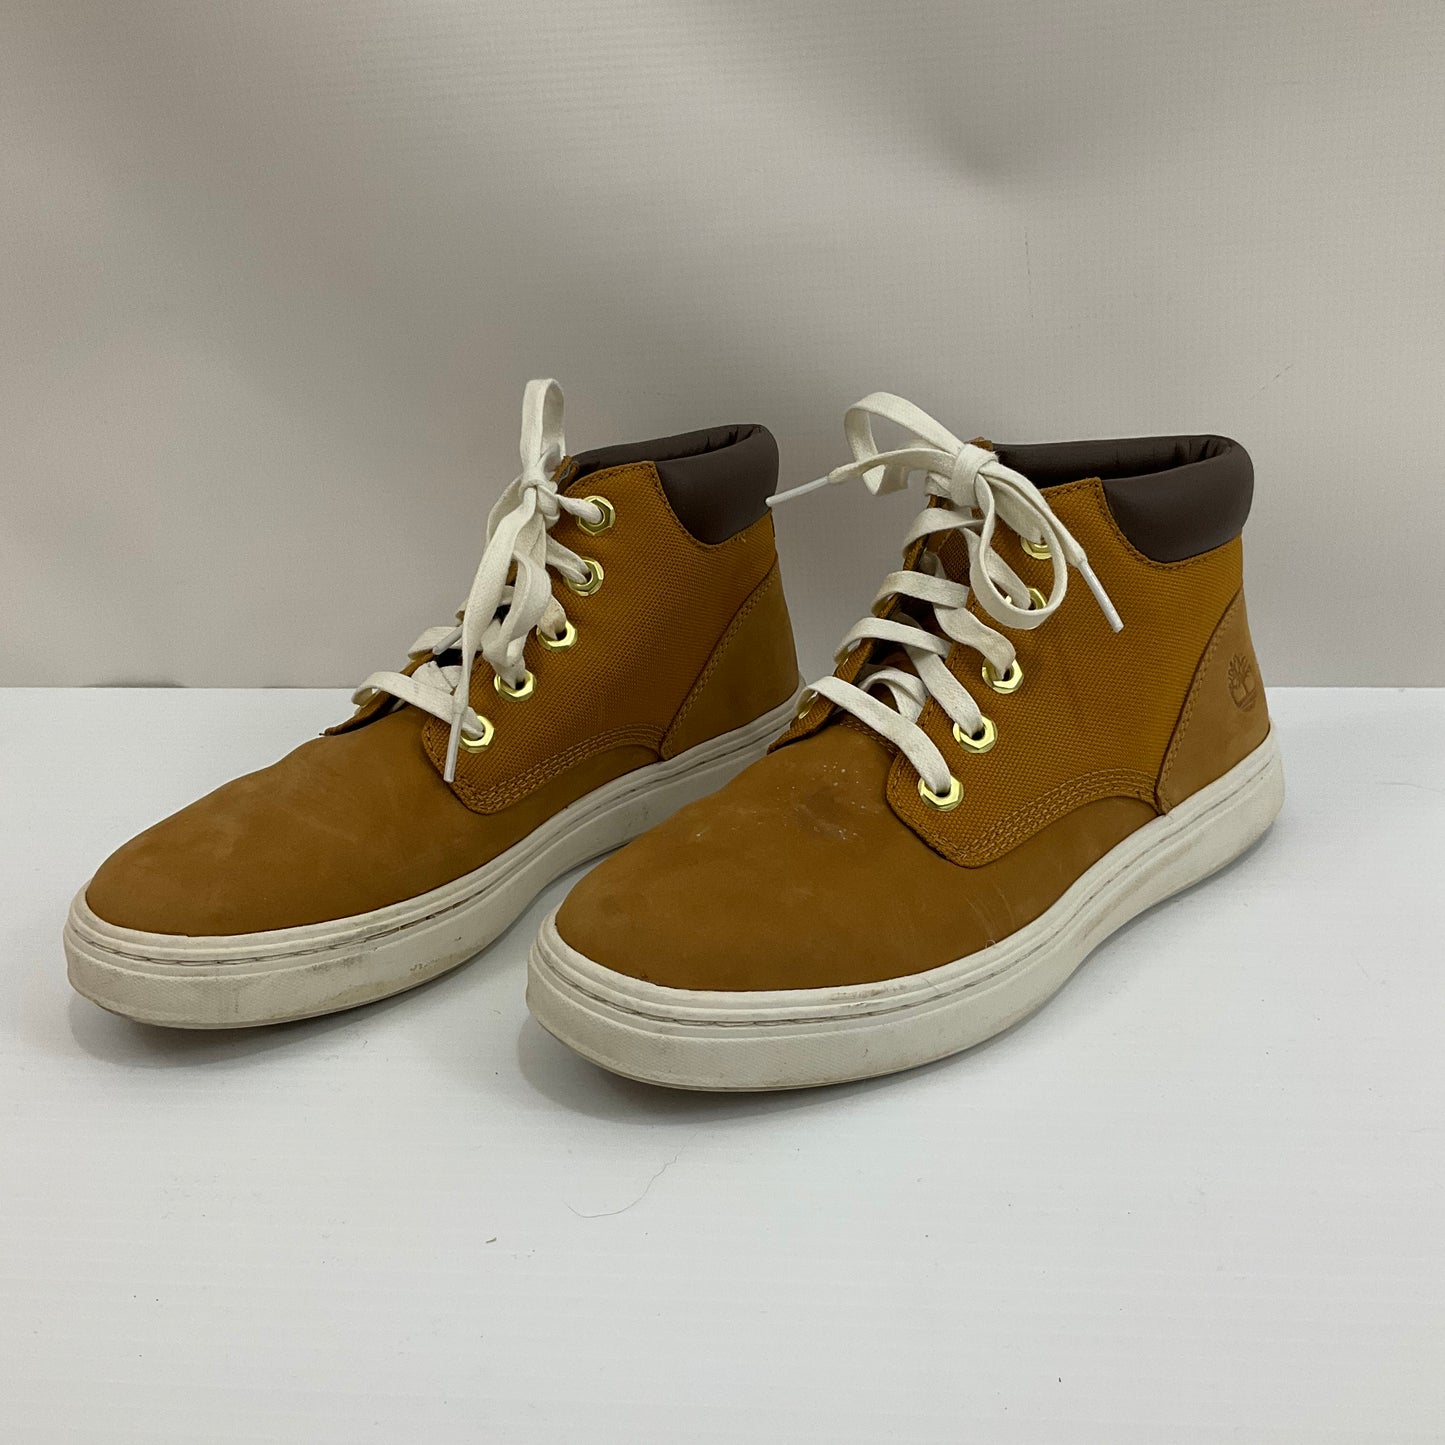 Shoes Sneakers By Timberland  Size: 7.5